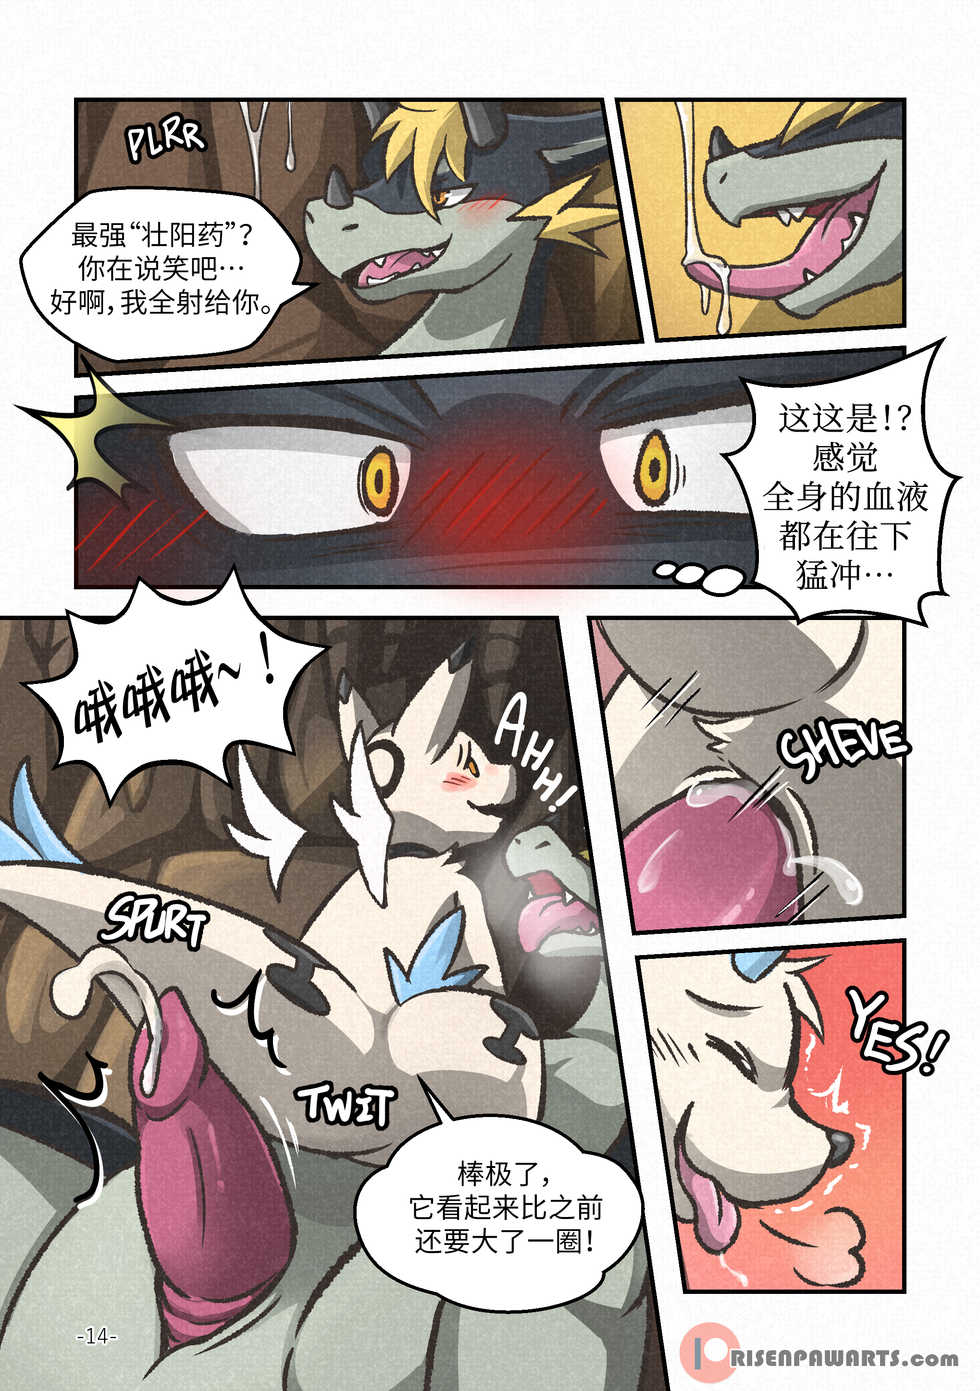 [Risenpaw] Out of Control [Chinese] [悬赏大厅×不可视汉化组] - Page 13